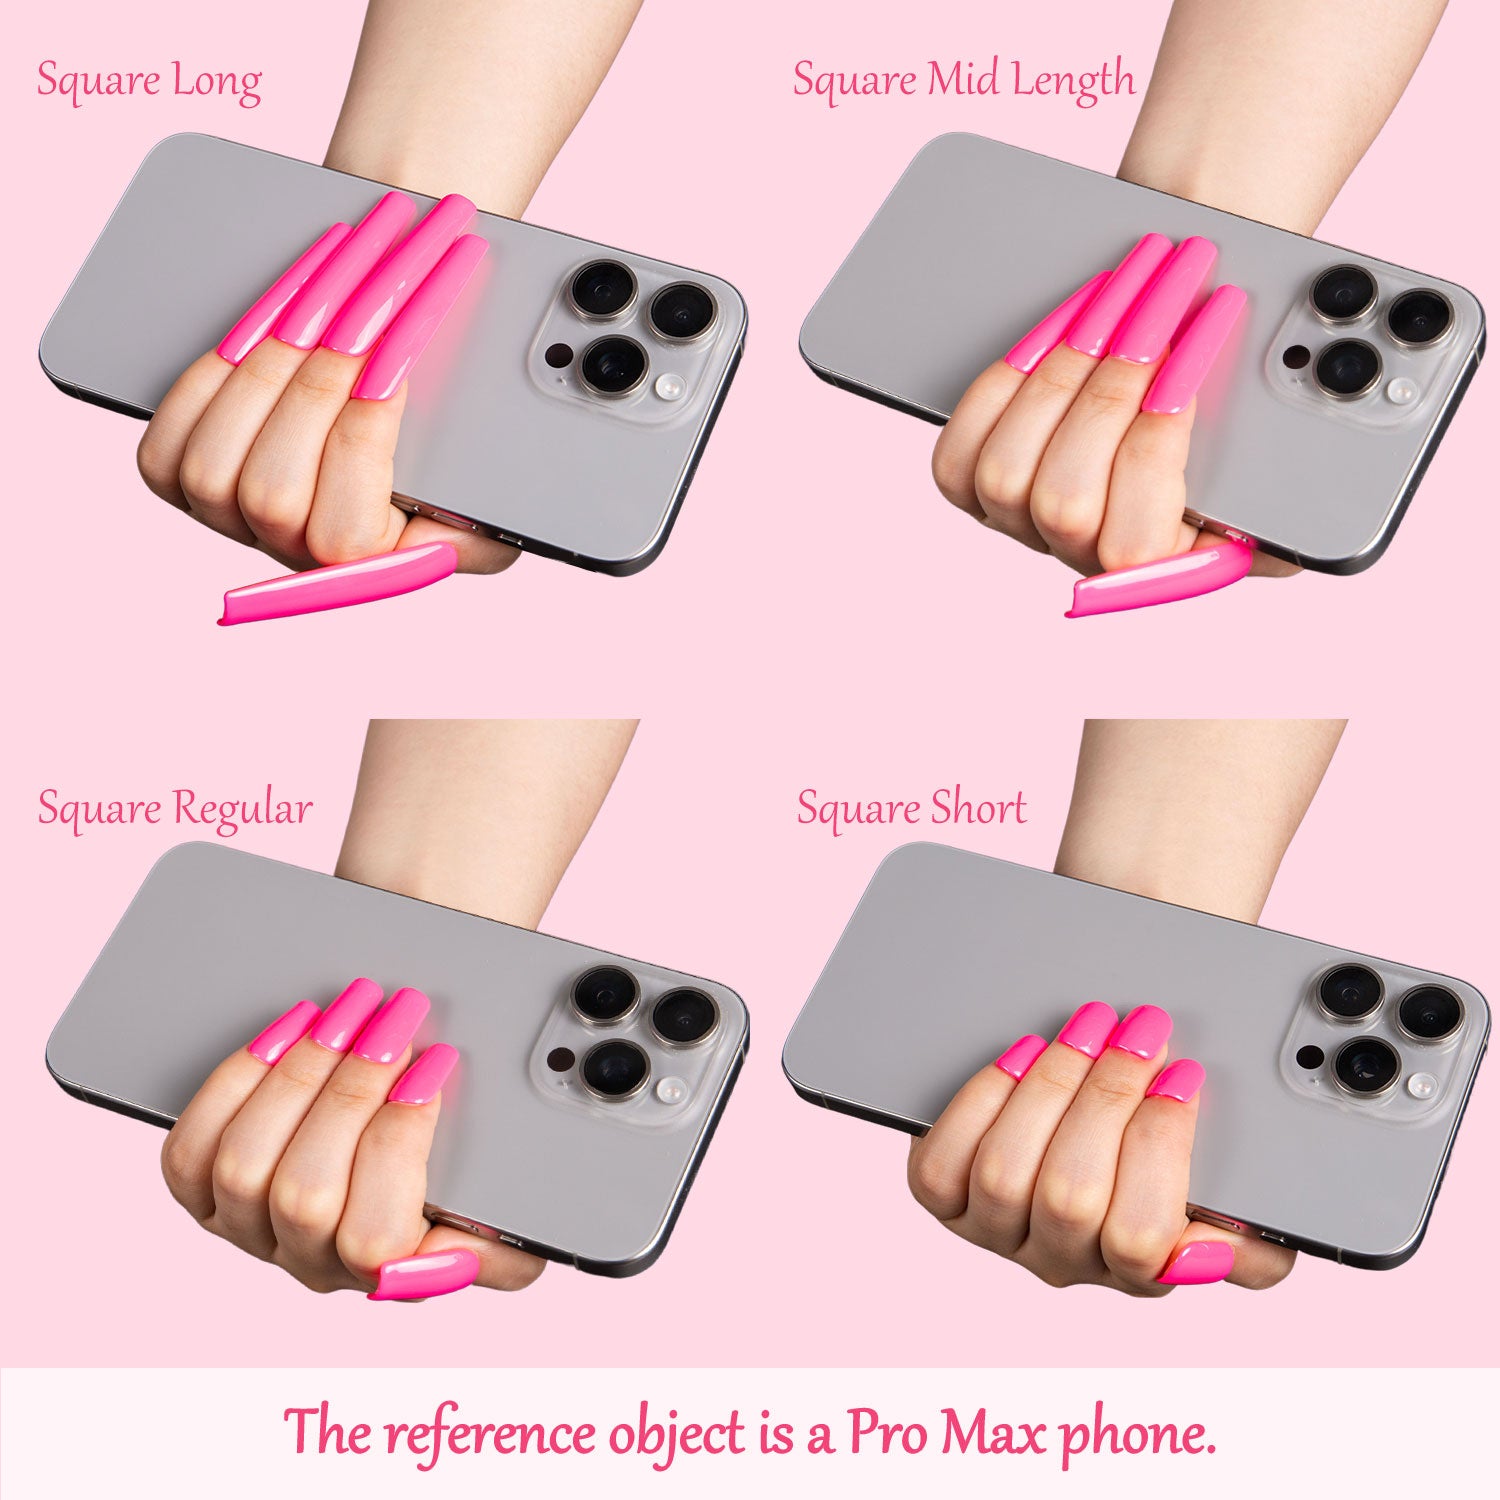 Four hands holding a Pro Max phone, each displaying different lengths of pink square acrylic nails labeled as Square Long, Square Mid Length, Square Regular, and Square Short. Text reads: 'The reference object is a Pro Max phone.'